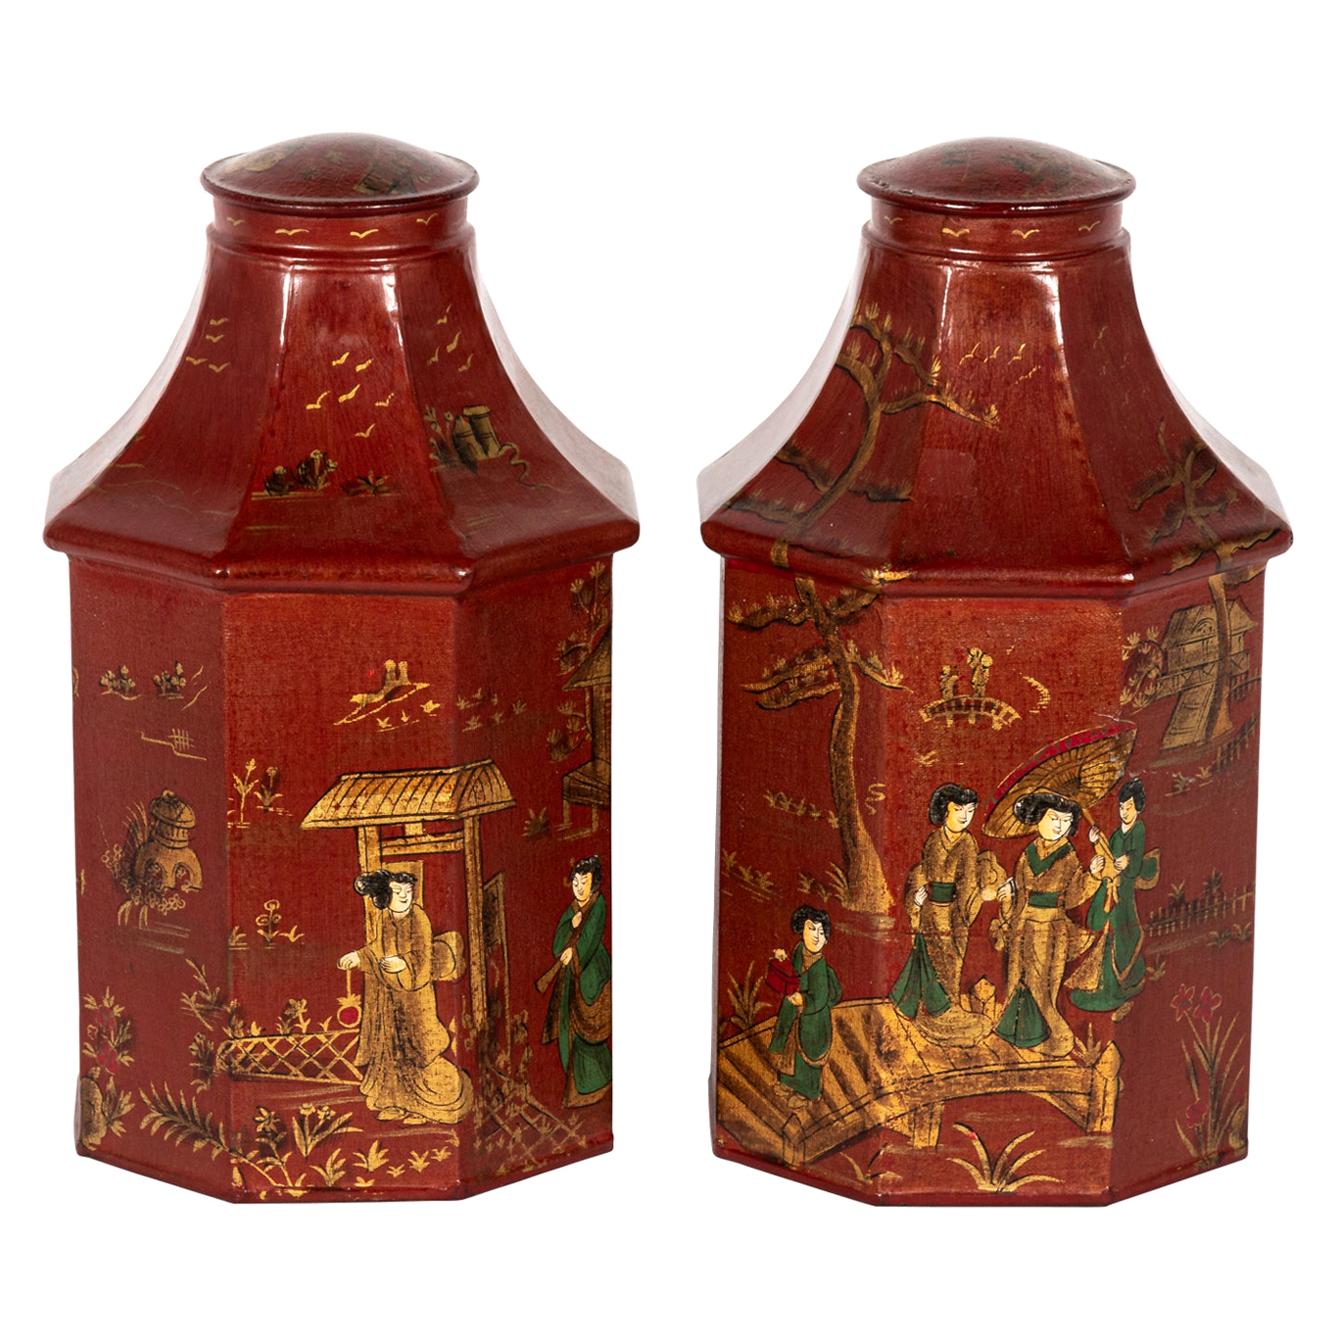 Pair of Red Decorated Tea Tins